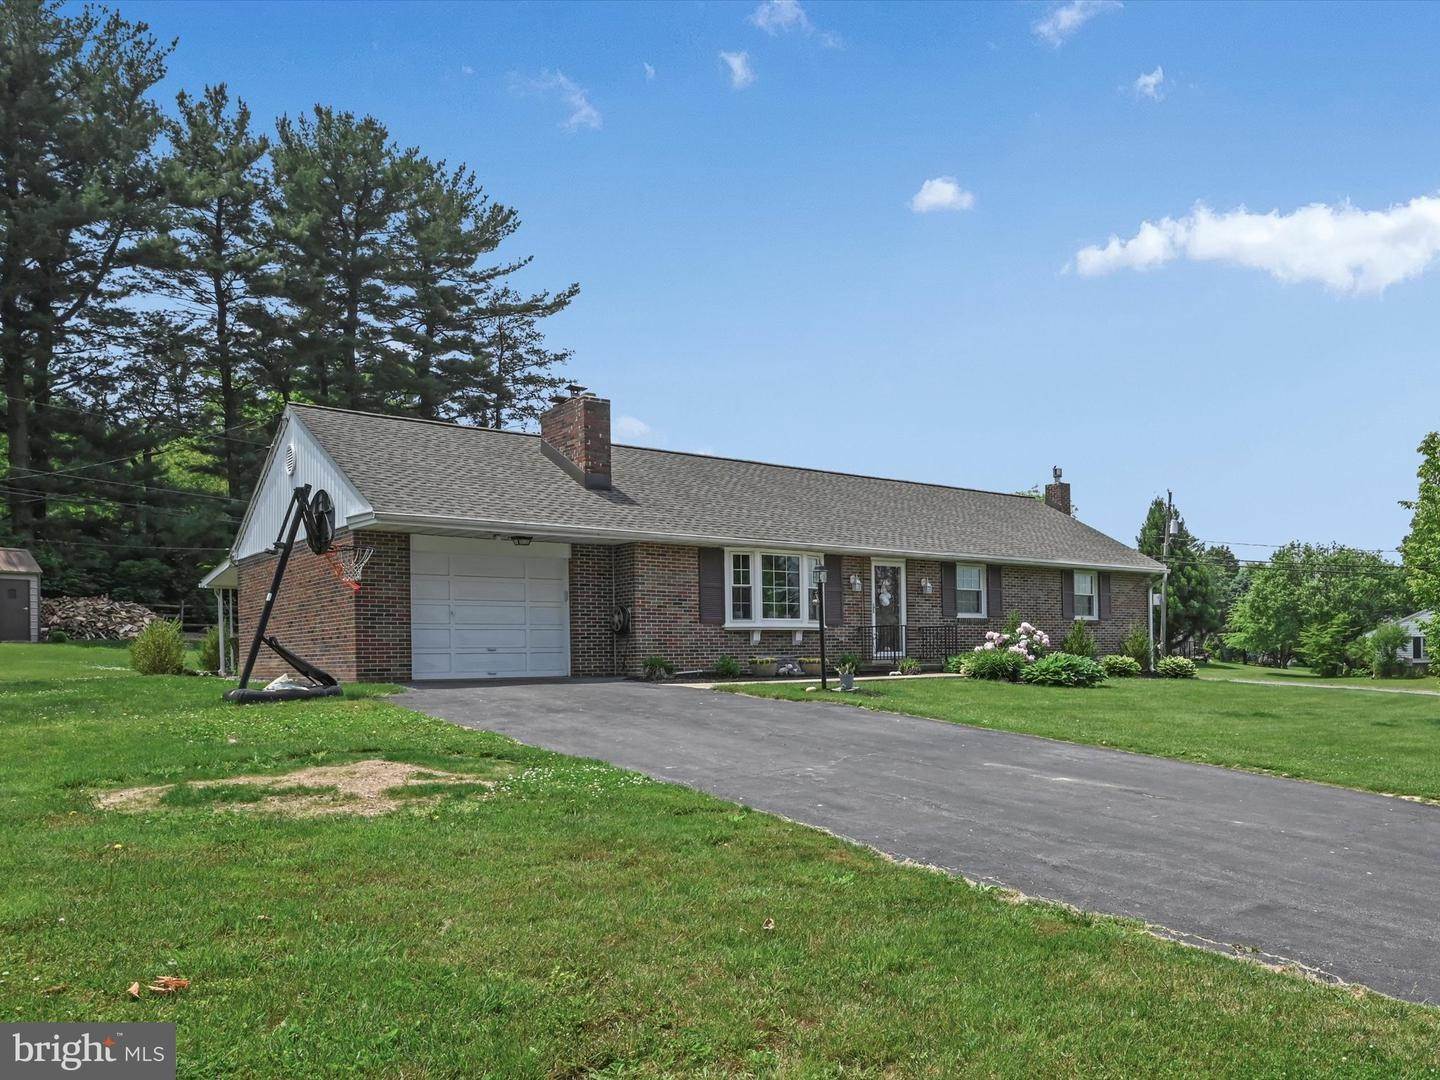 2. Residential for Sale at 362 SUN VALLEY Drive Leola, Pennsylvania 17540 United States